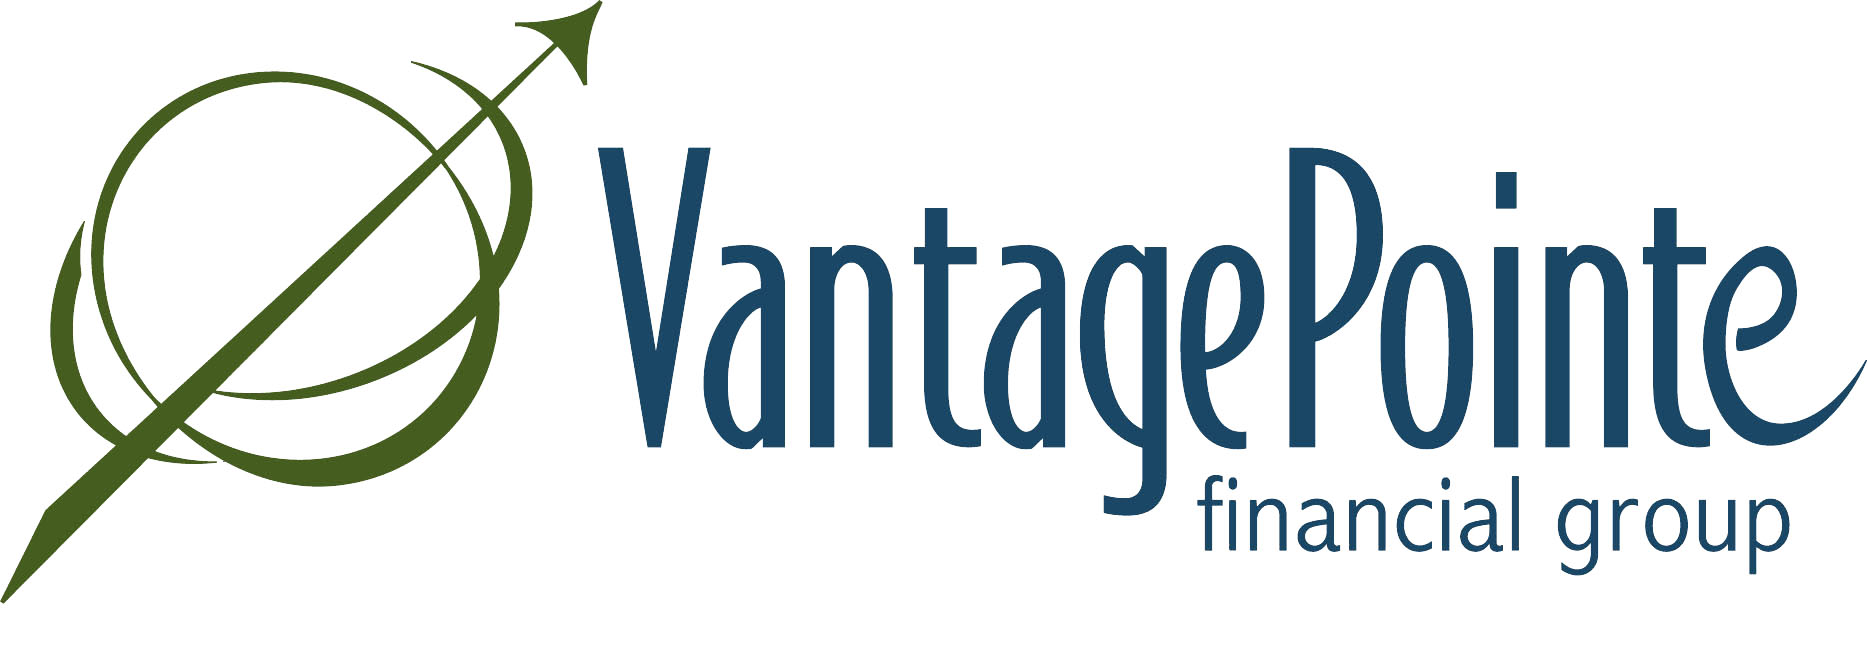 Vantagepointe Financial Group